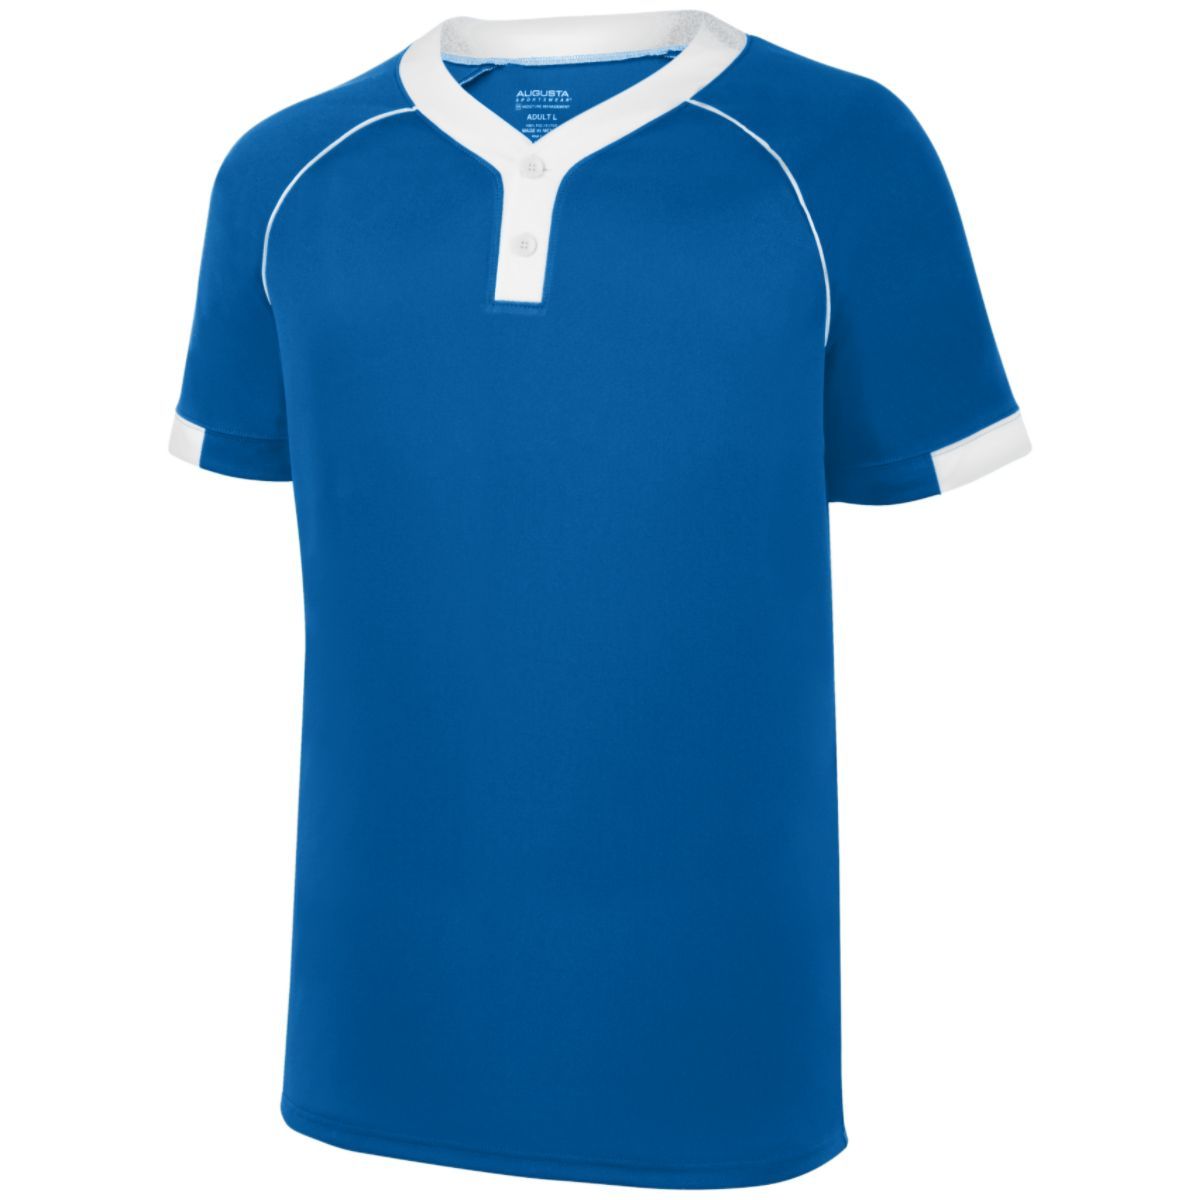 Augusta Sportswear Stanza Jersey in Royal/White  -Part of the Adult, Adult-Jersey, Augusta-Products, Baseball, Shirts, All-Sports, All-Sports-1 product lines at KanaleyCreations.com